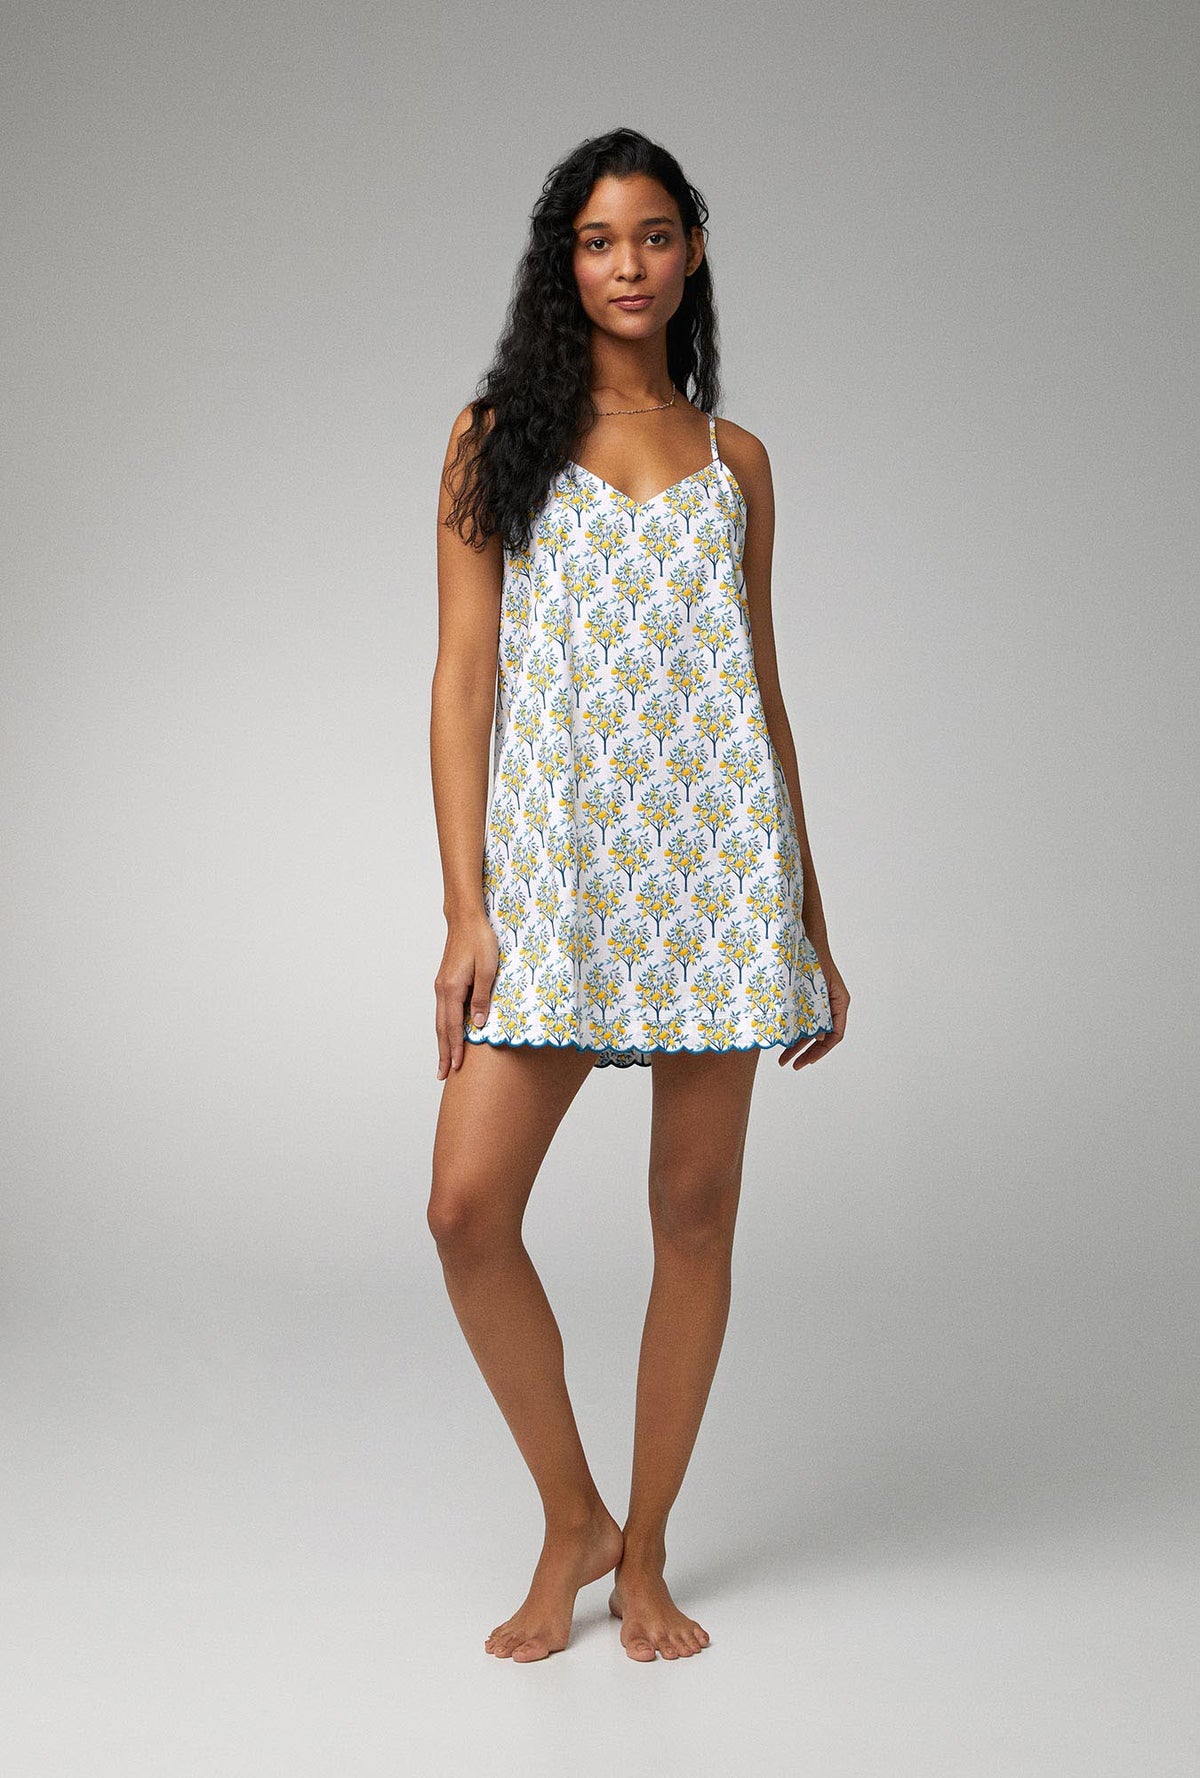 A lady wearing Woven Cotton Poplin Scallop Chemise with Lemon Trees  print